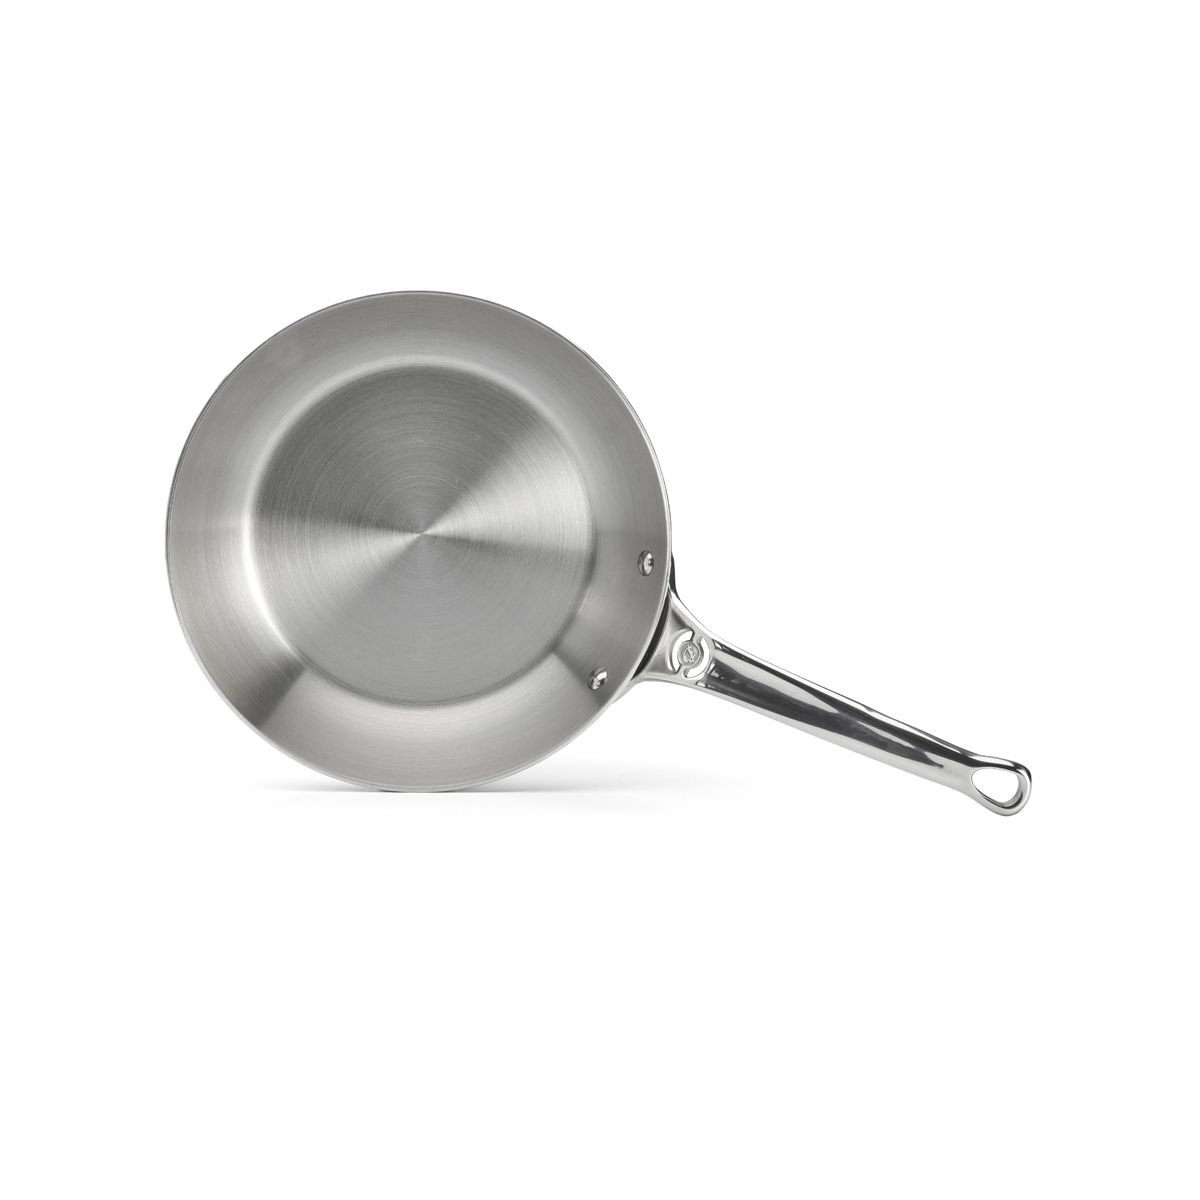 Stainless Steel Fry Pan - Induction Ready - Round - Silver - 12 - 1 Count  Box